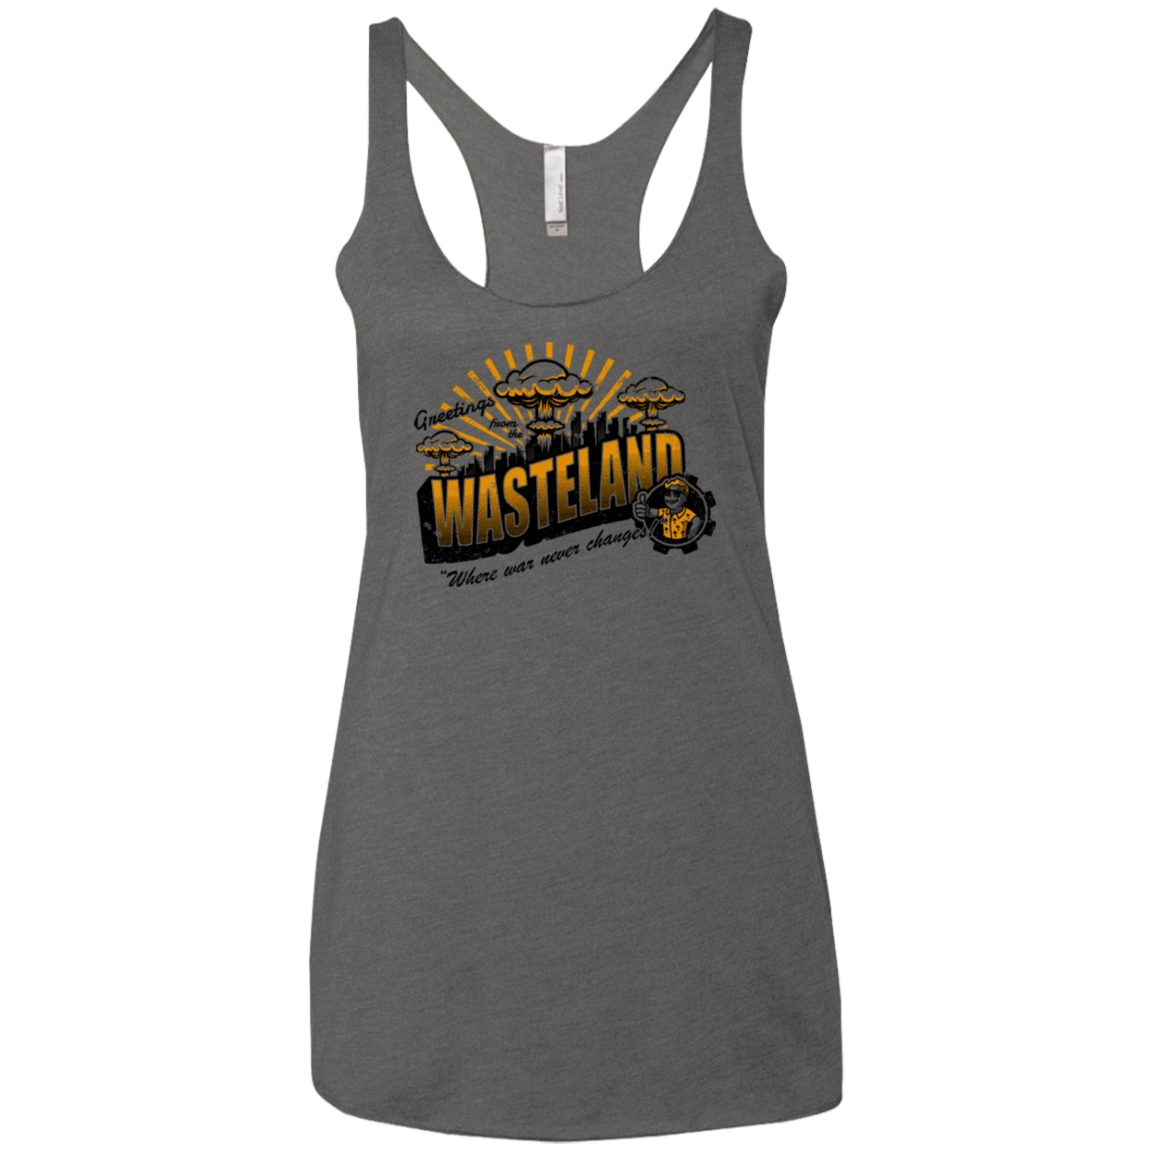 T-Shirts Premium Heather / X-Small Greetings from the Wasteland! Women's Triblend Racerback Tank